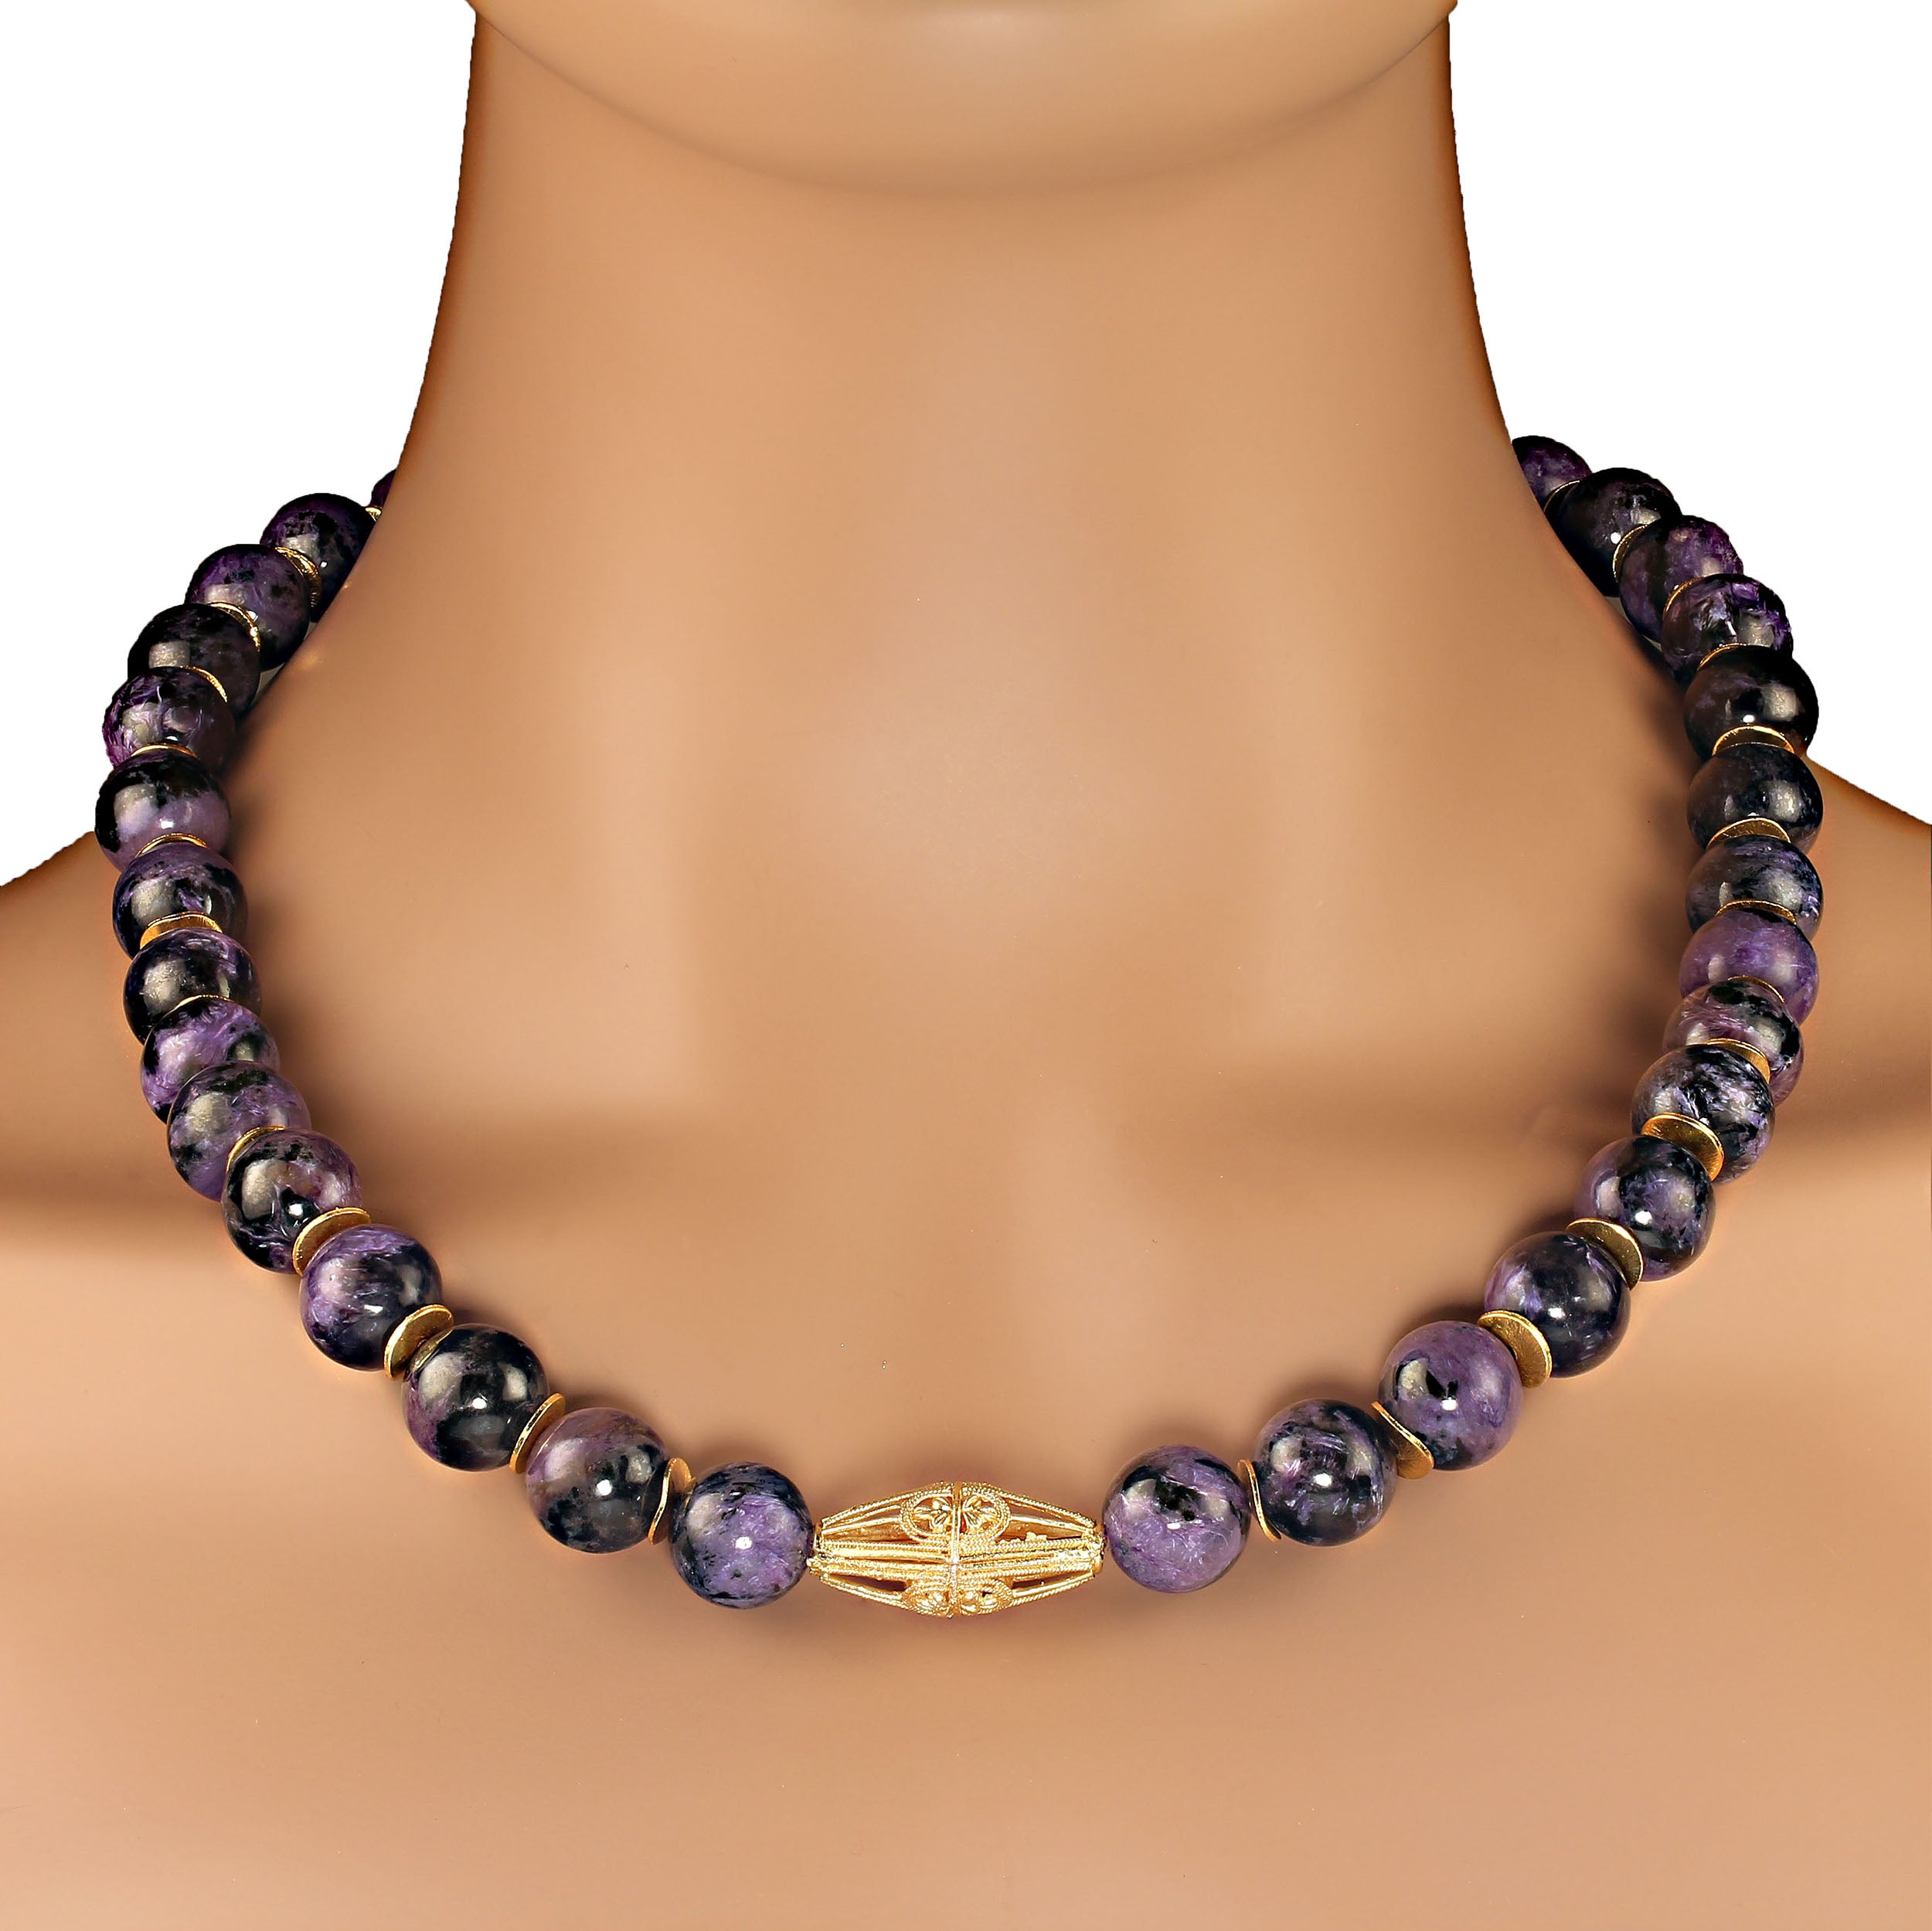 AJD 22 Inch Glowing Charoite with gold tone accents necklace     Great Gift!